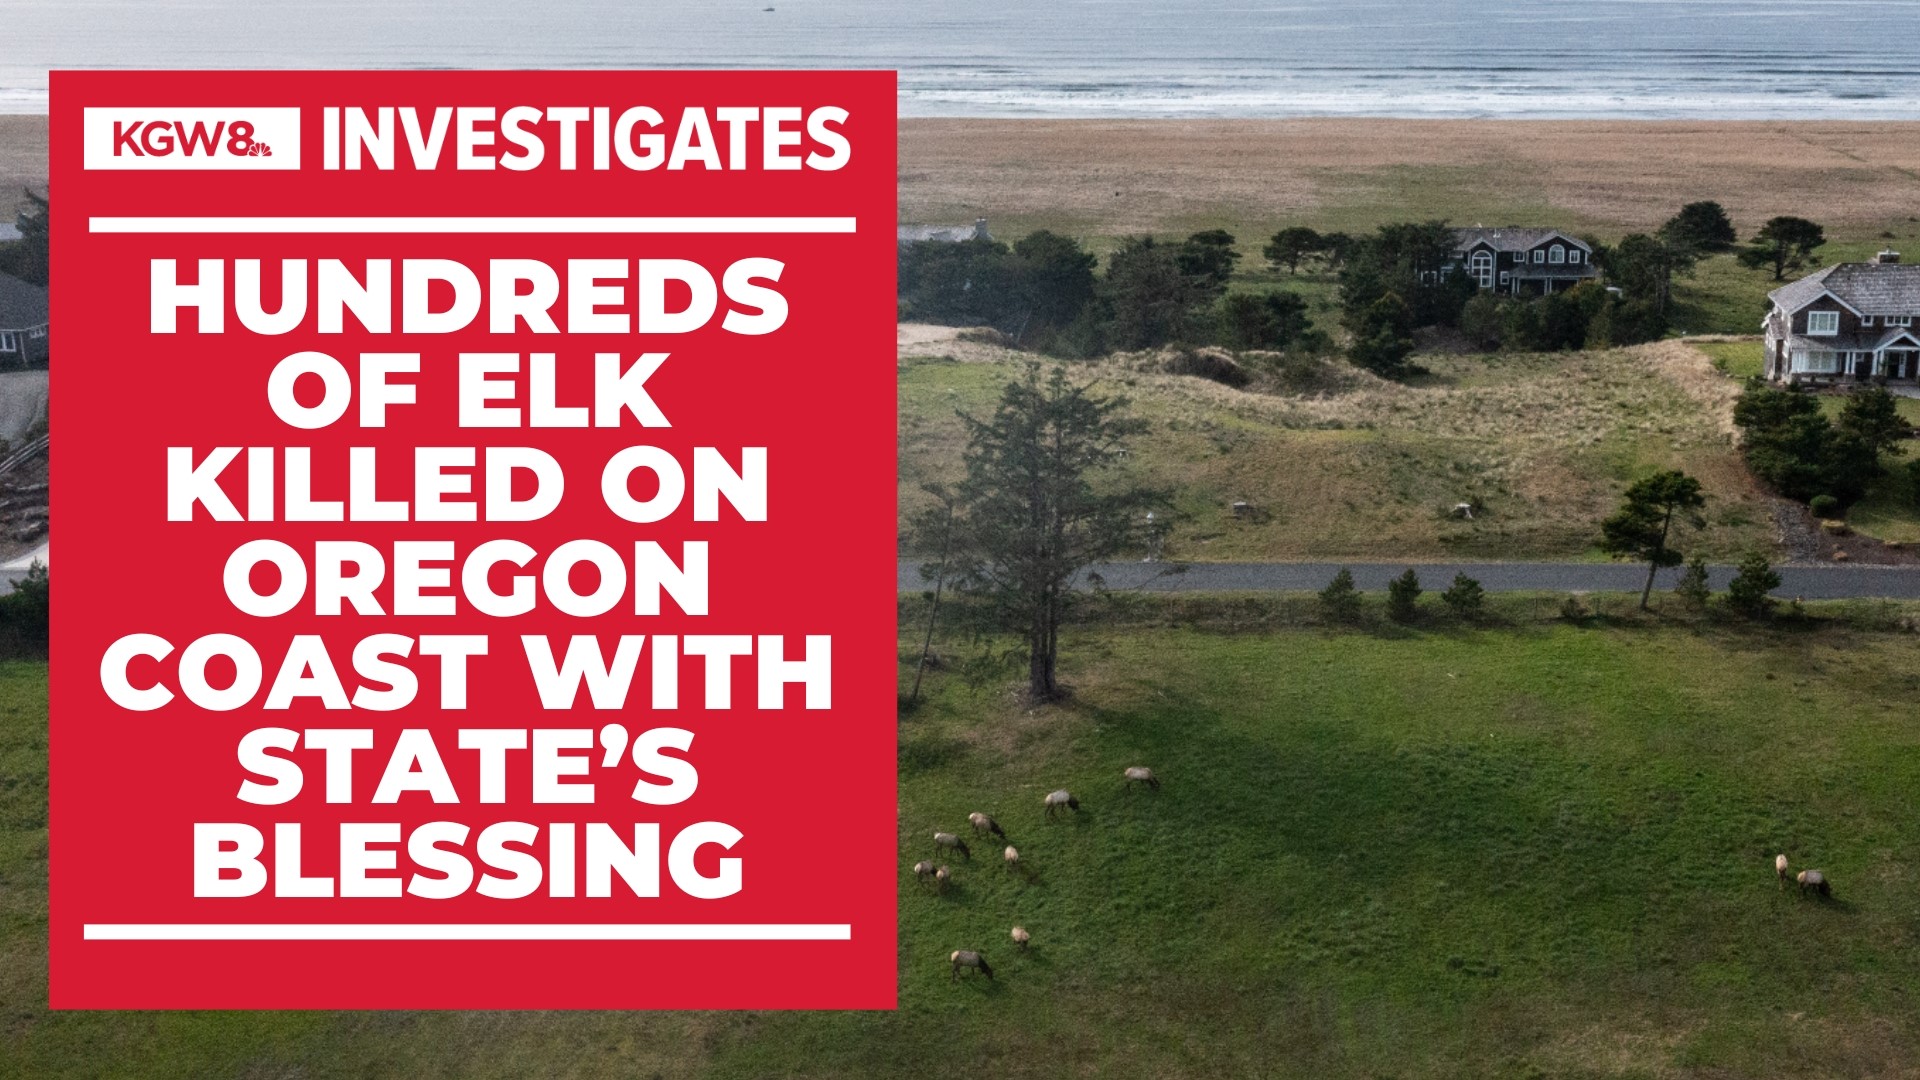 In two years, 77 coastal elk were killed on a single residential property near Gearhart. KGW looked into the ODFW-backed program that made it possible.